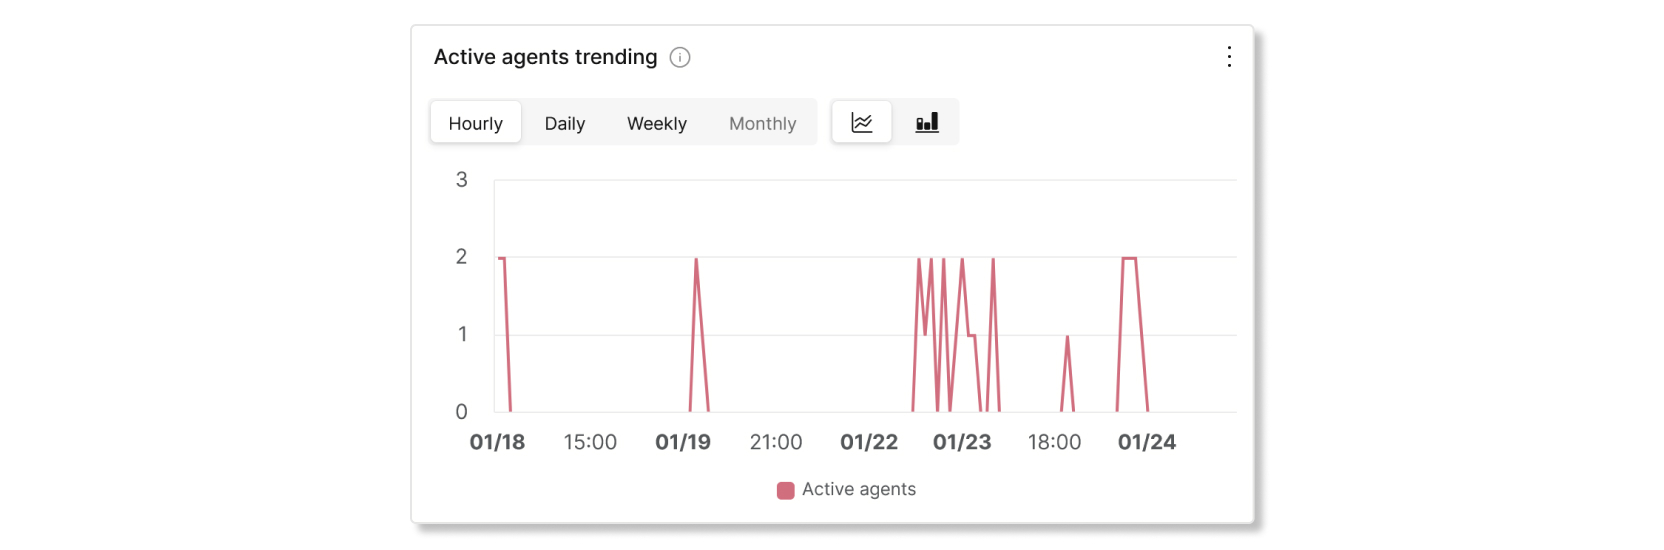 Active agents trending chart in Customer Experience analytics